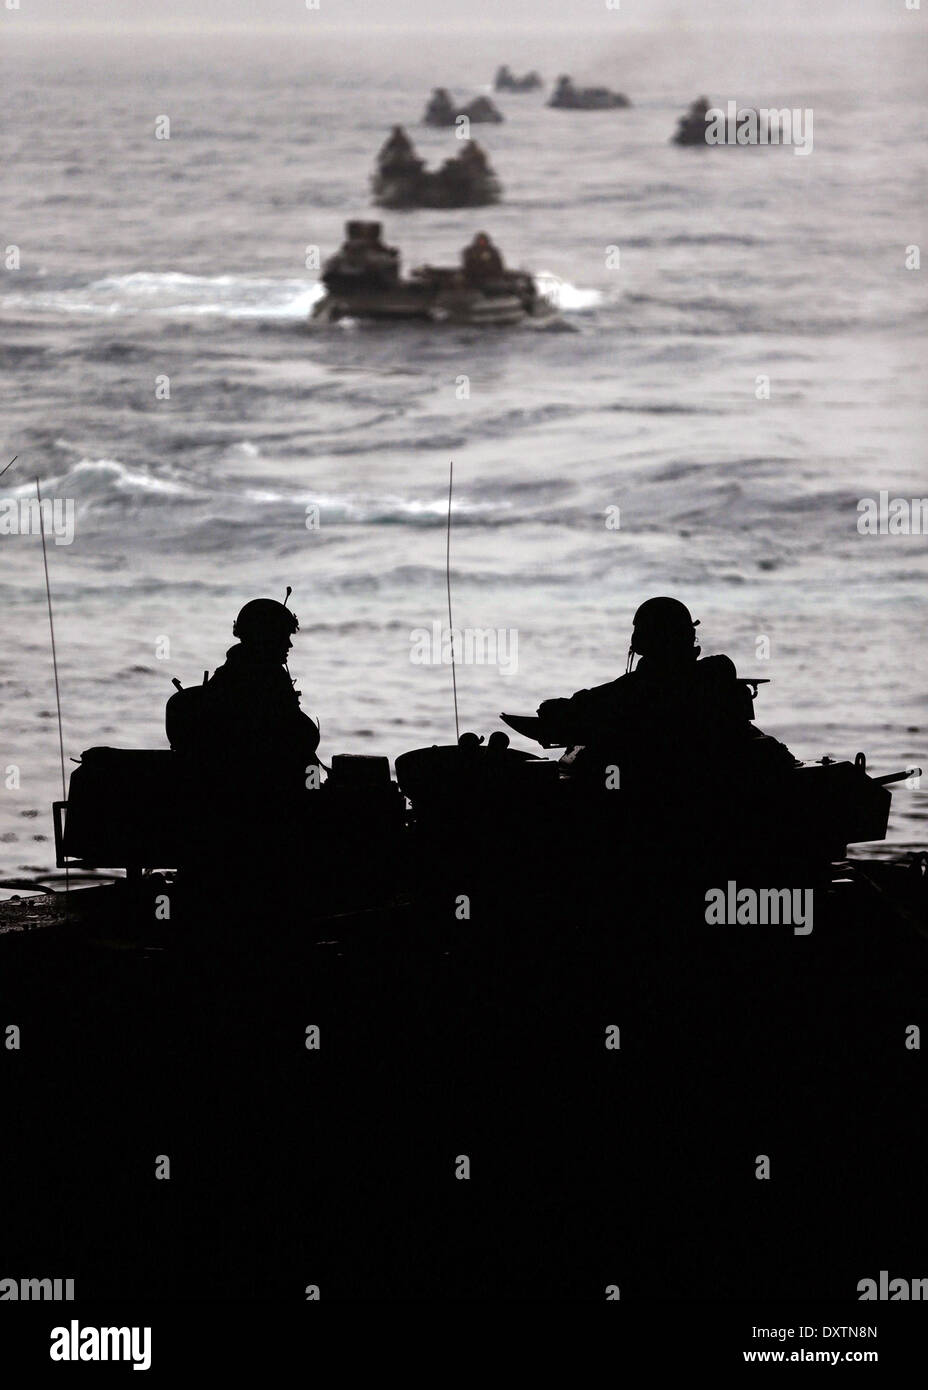 US Marines maneuver their AAV-7 amphibious vehicles off the USS Harper Ferry during amphibious assault training exercise Ssang Yong March 29, 2014 off Pohang, South Korea. Stock Photo